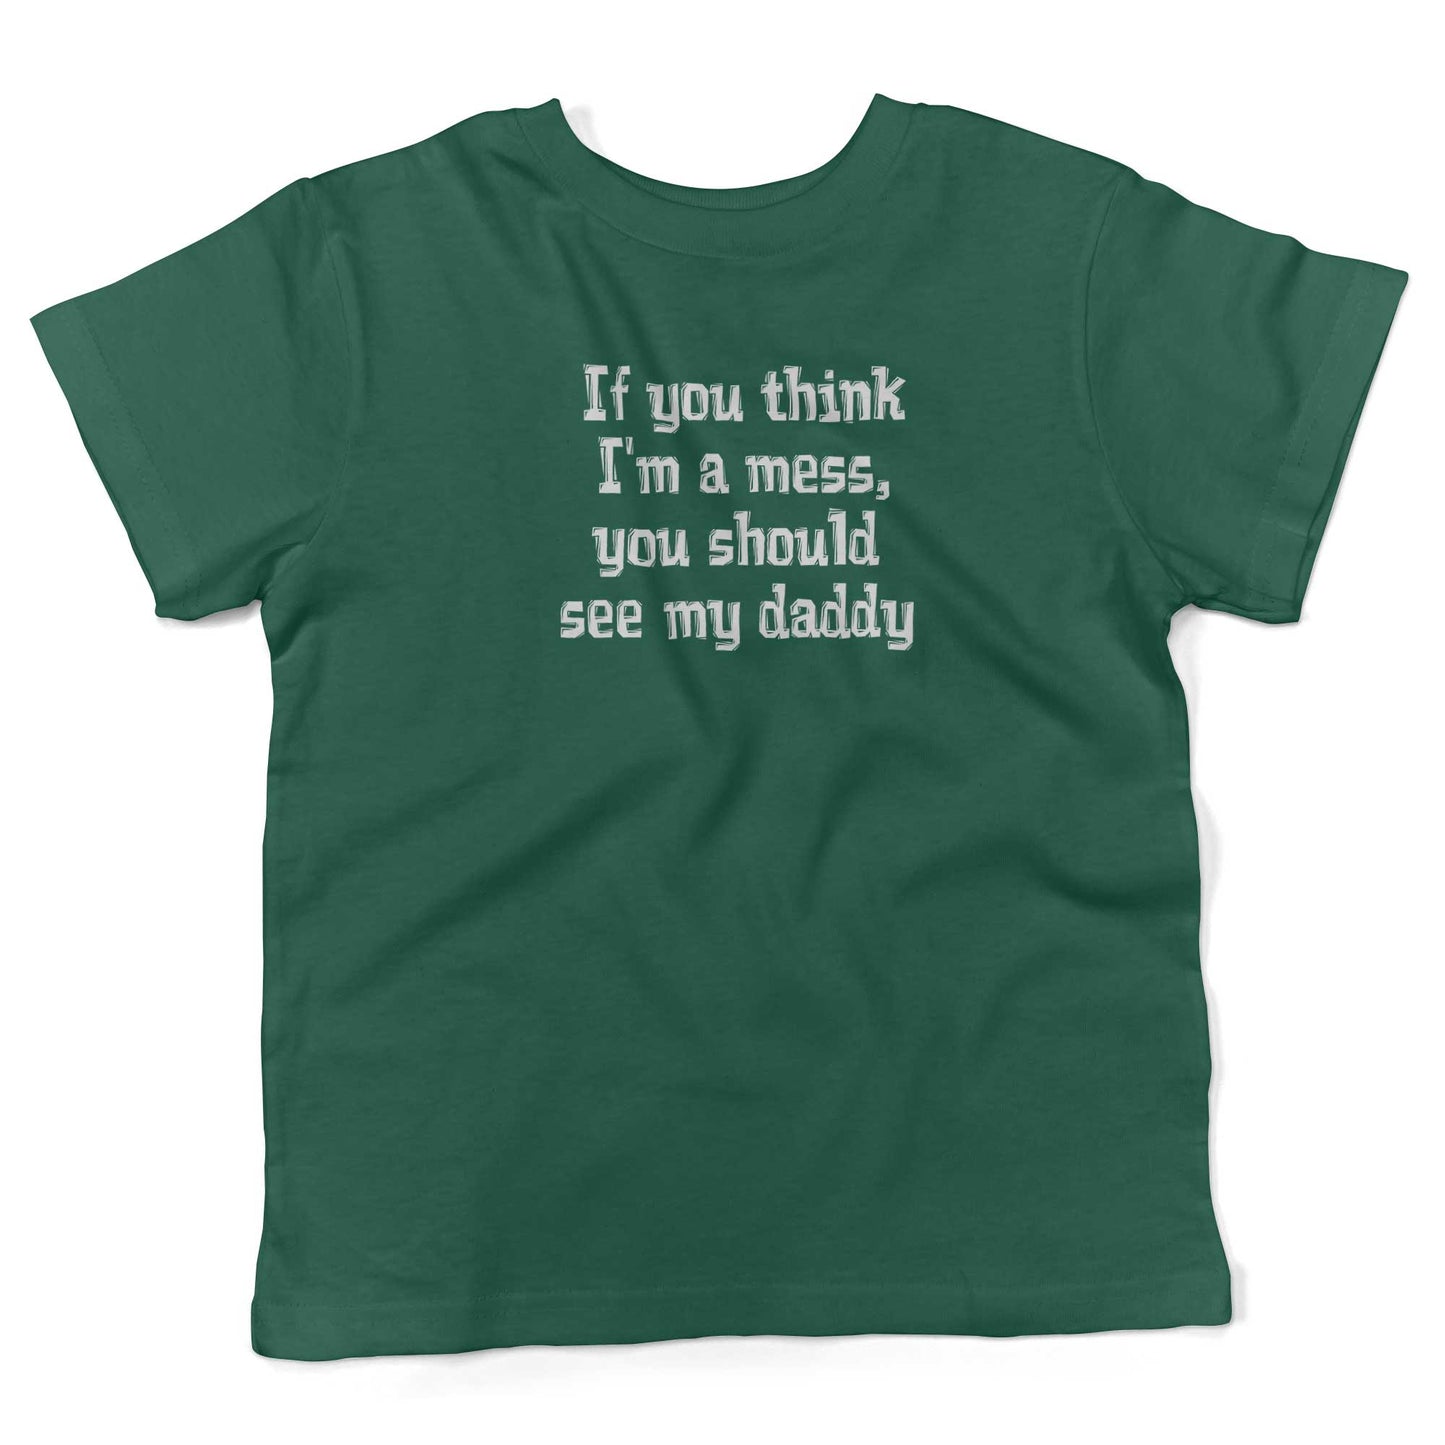 If You Think I'm A Mess, You Should See My Daddy Toddler Shirt-Kelly Green-2T